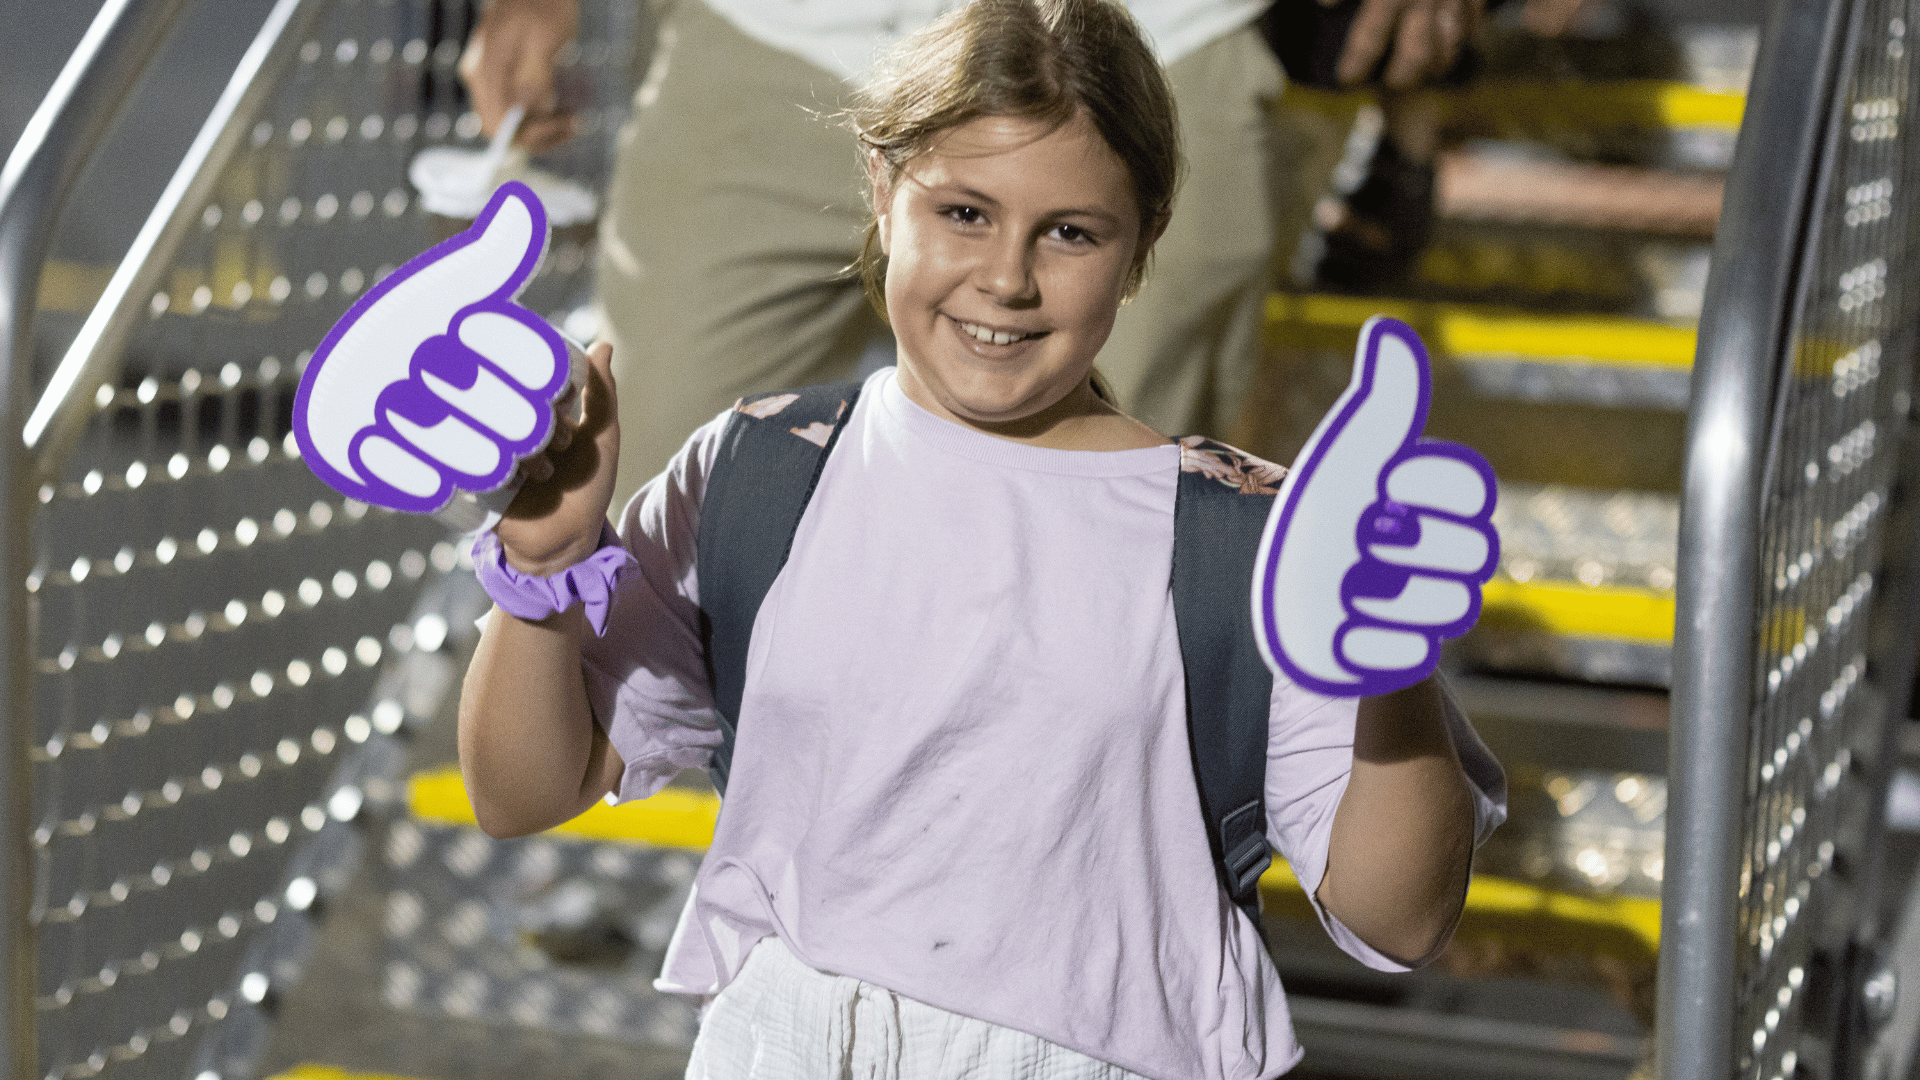 Young girl smiling with Bonza thumbs while departing aircraft.